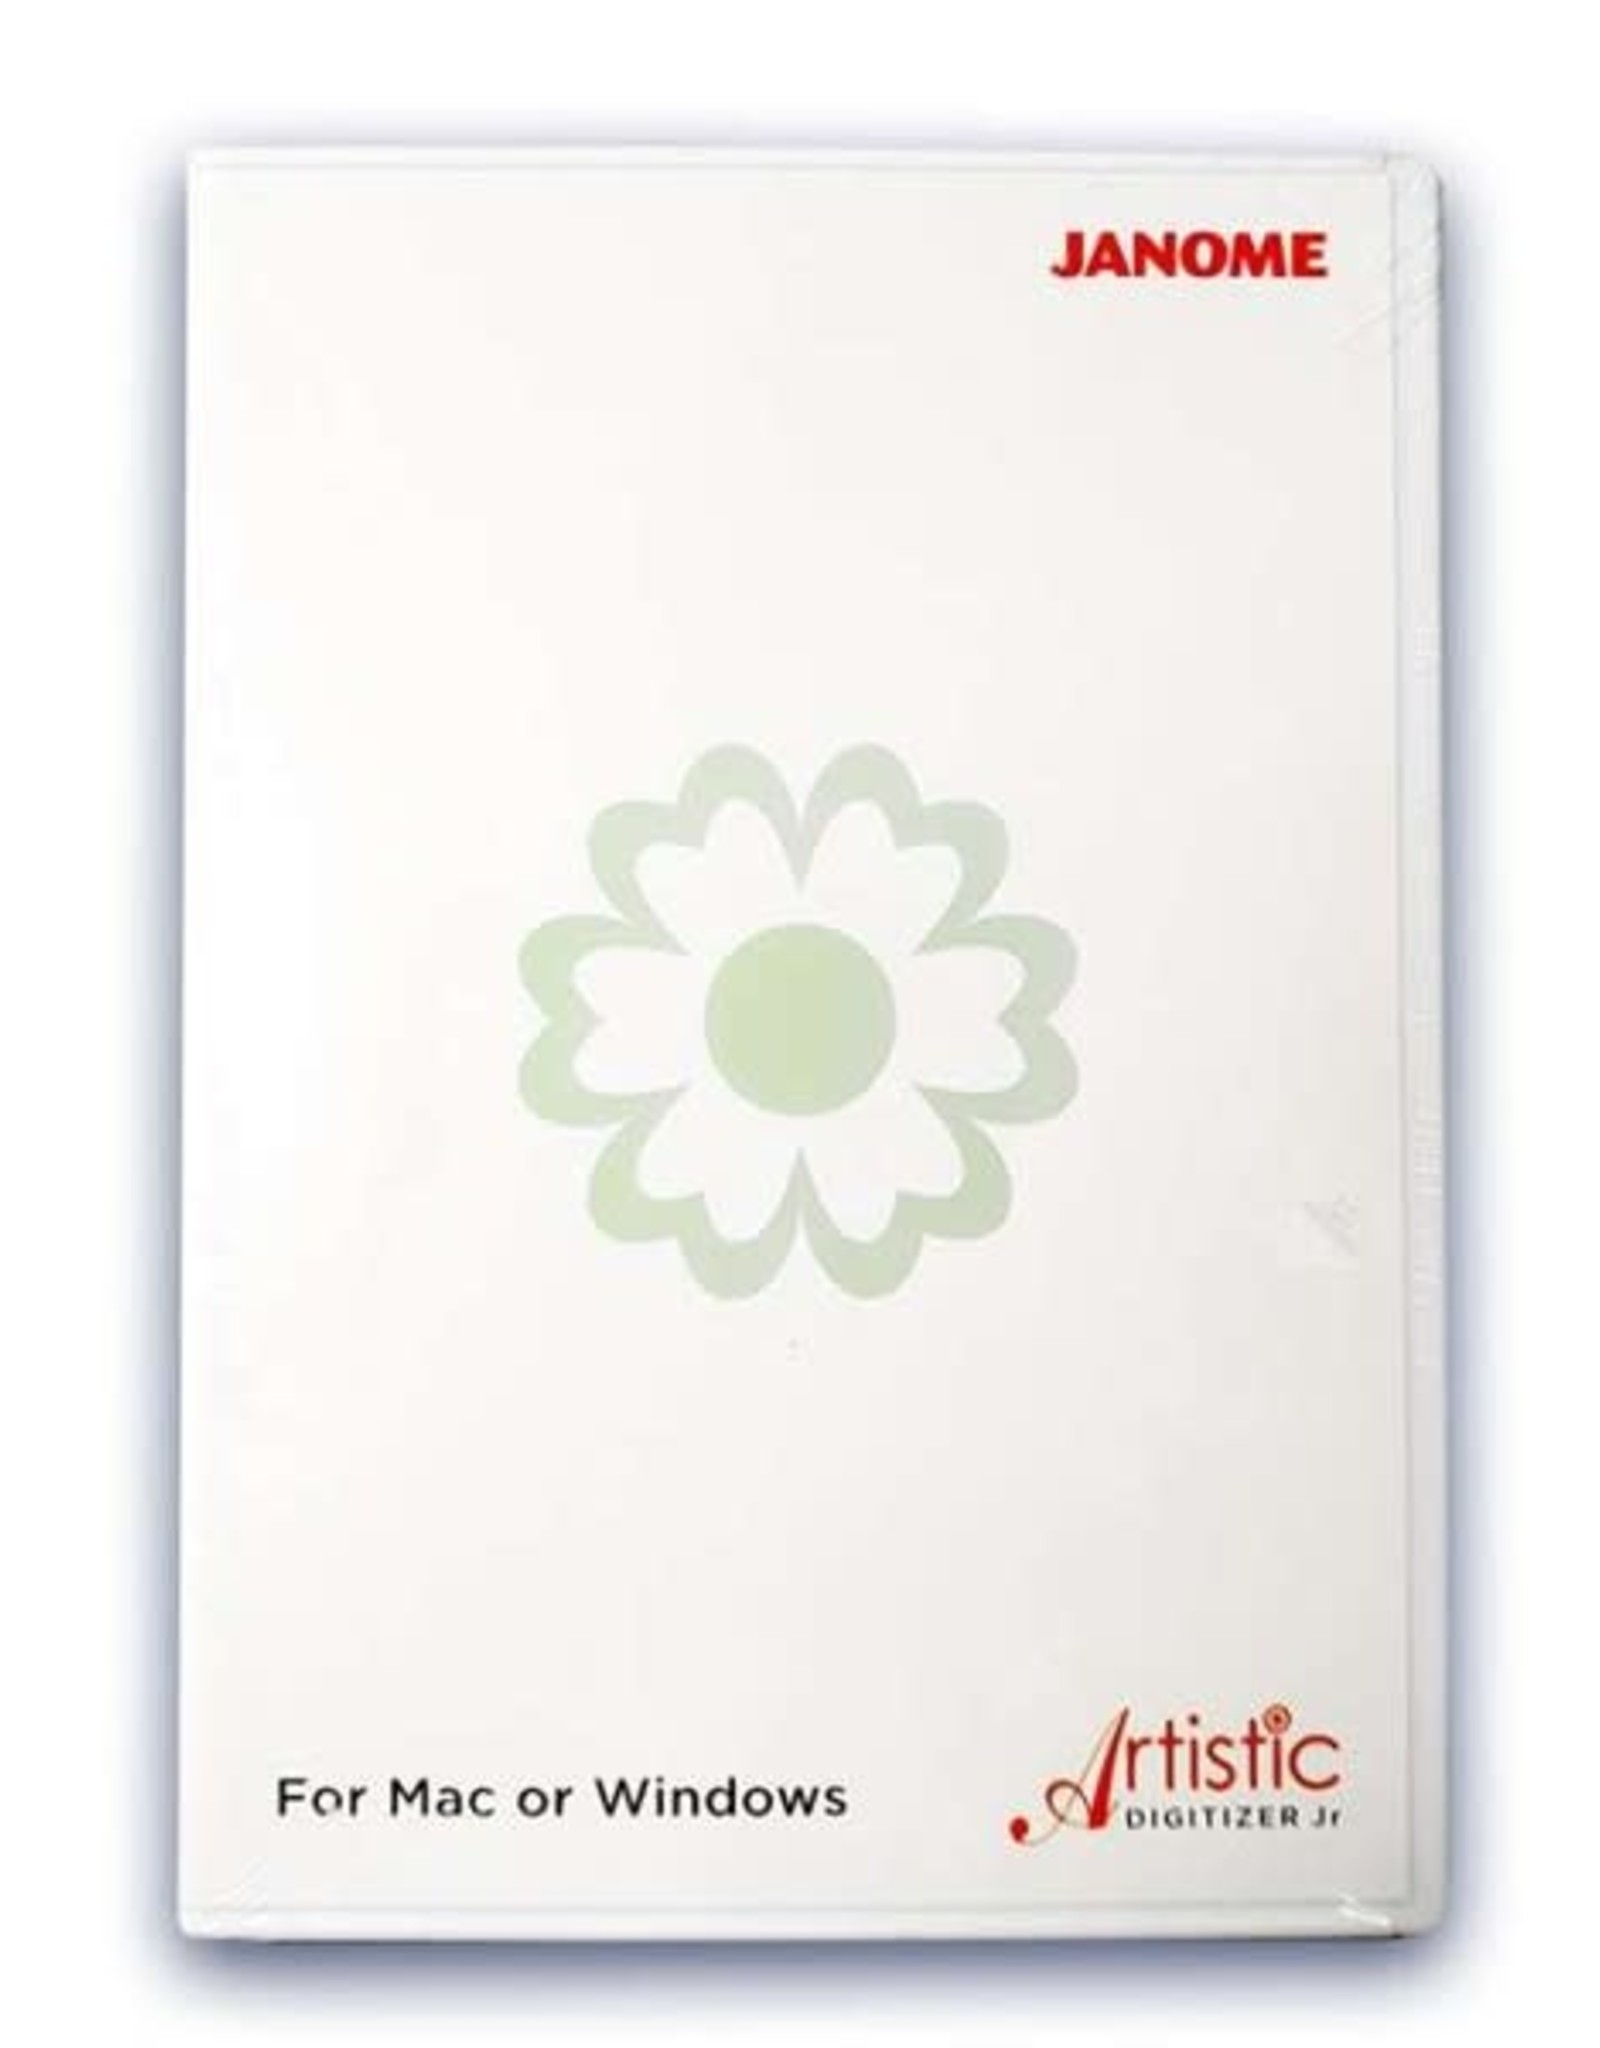 janome artistic digitizer review